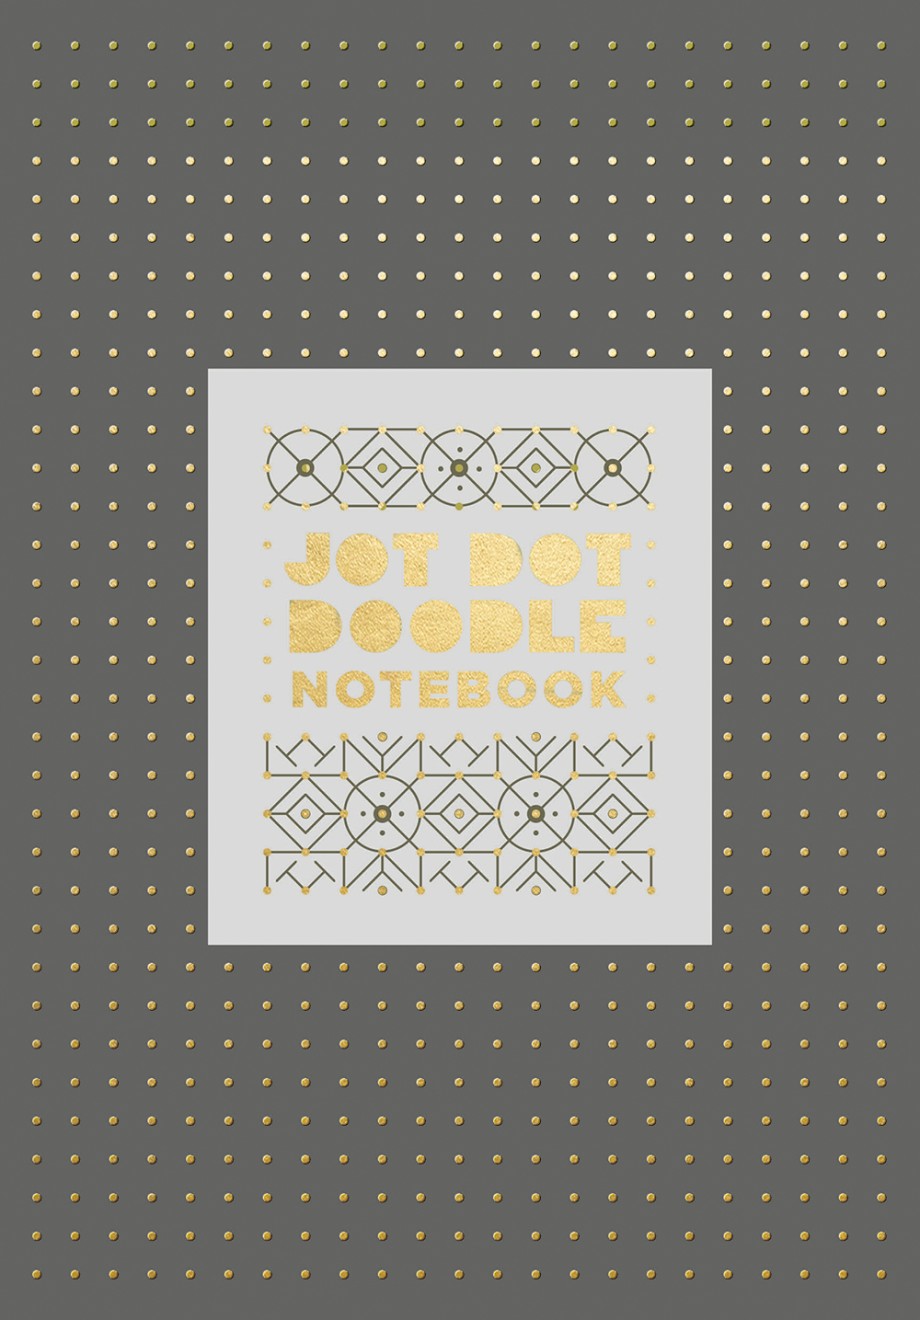 Jot Dot Doodle Notebook (Gray and Gold) 